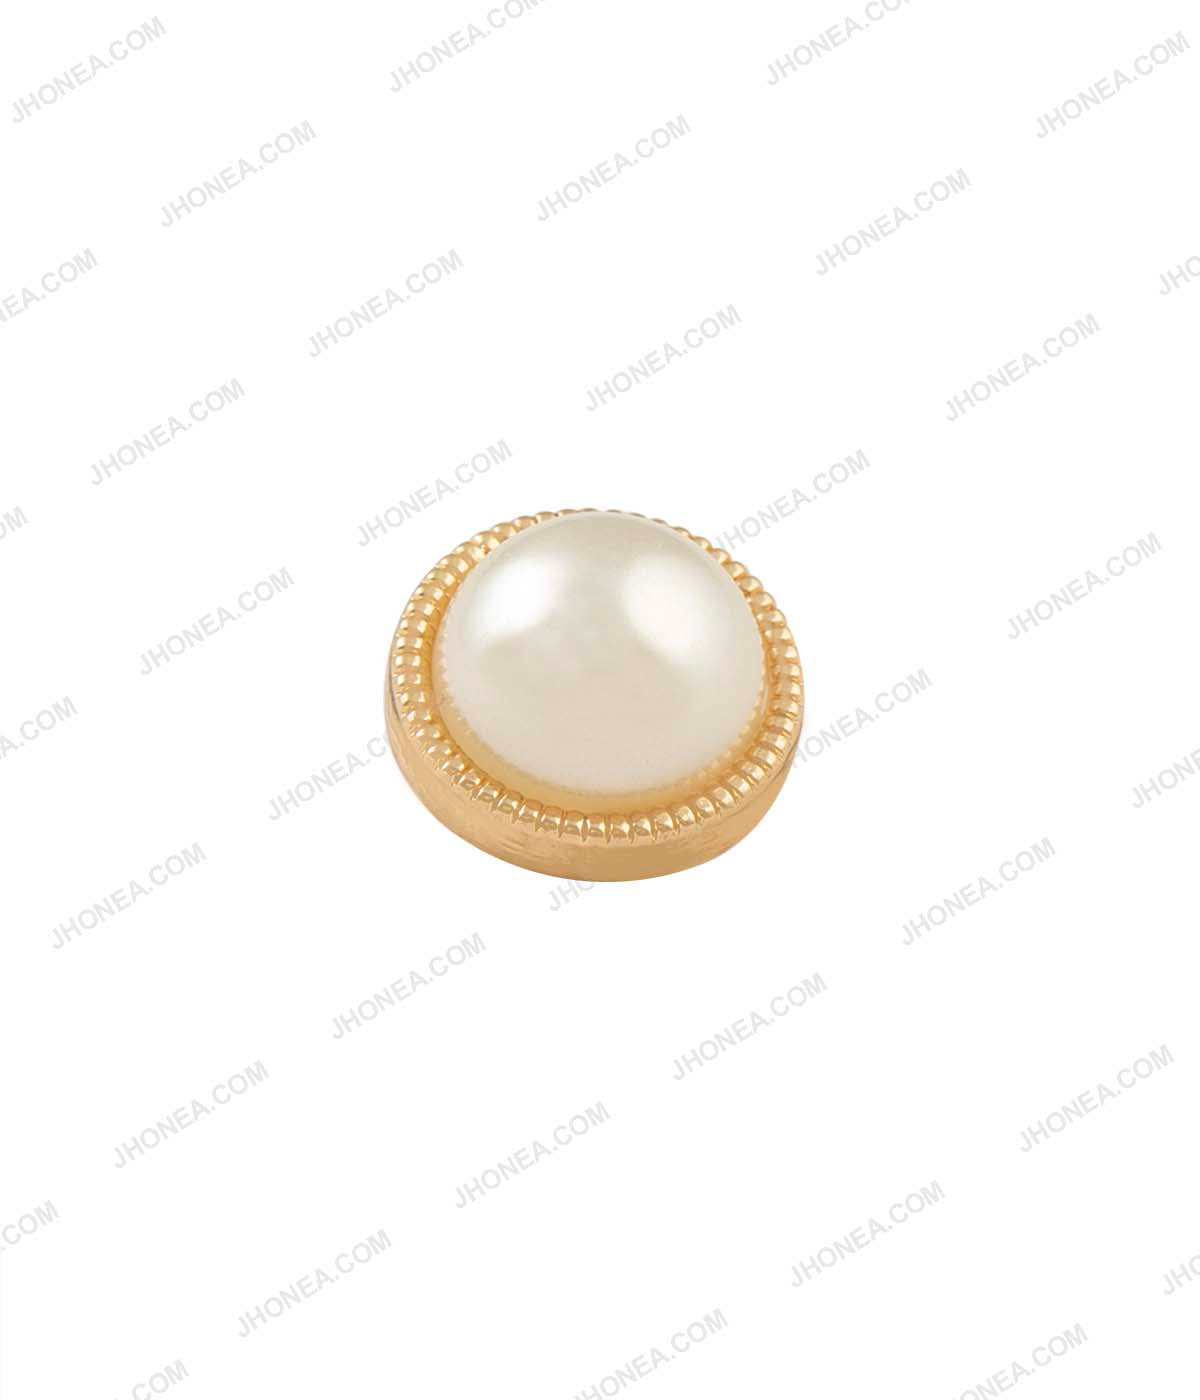 Shiny Gold & Shiny Silver Accent Border Dome Pearl Buttons